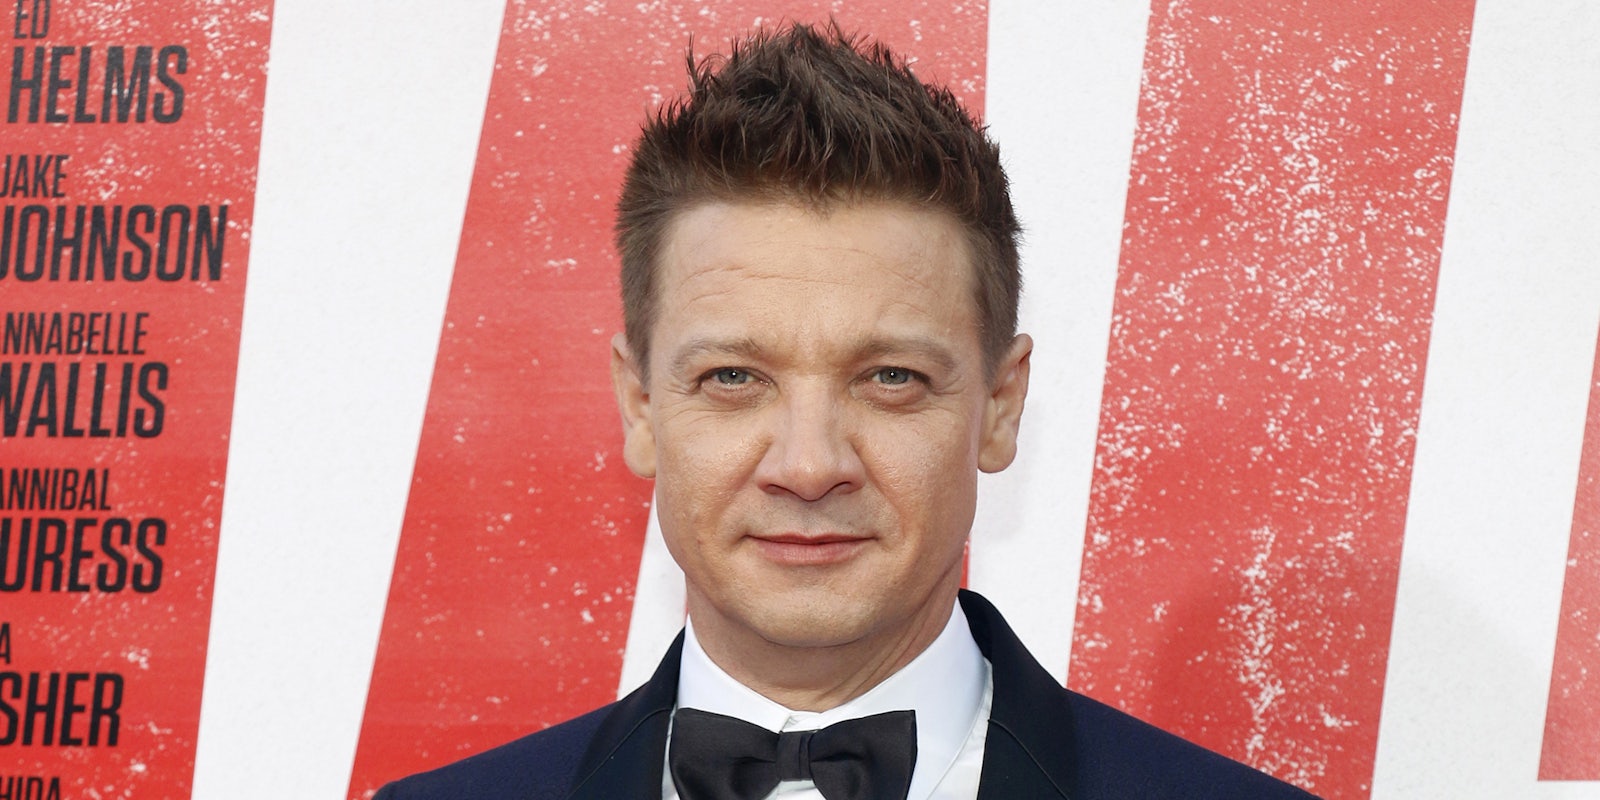 Jeremy Renner in front of red and white background